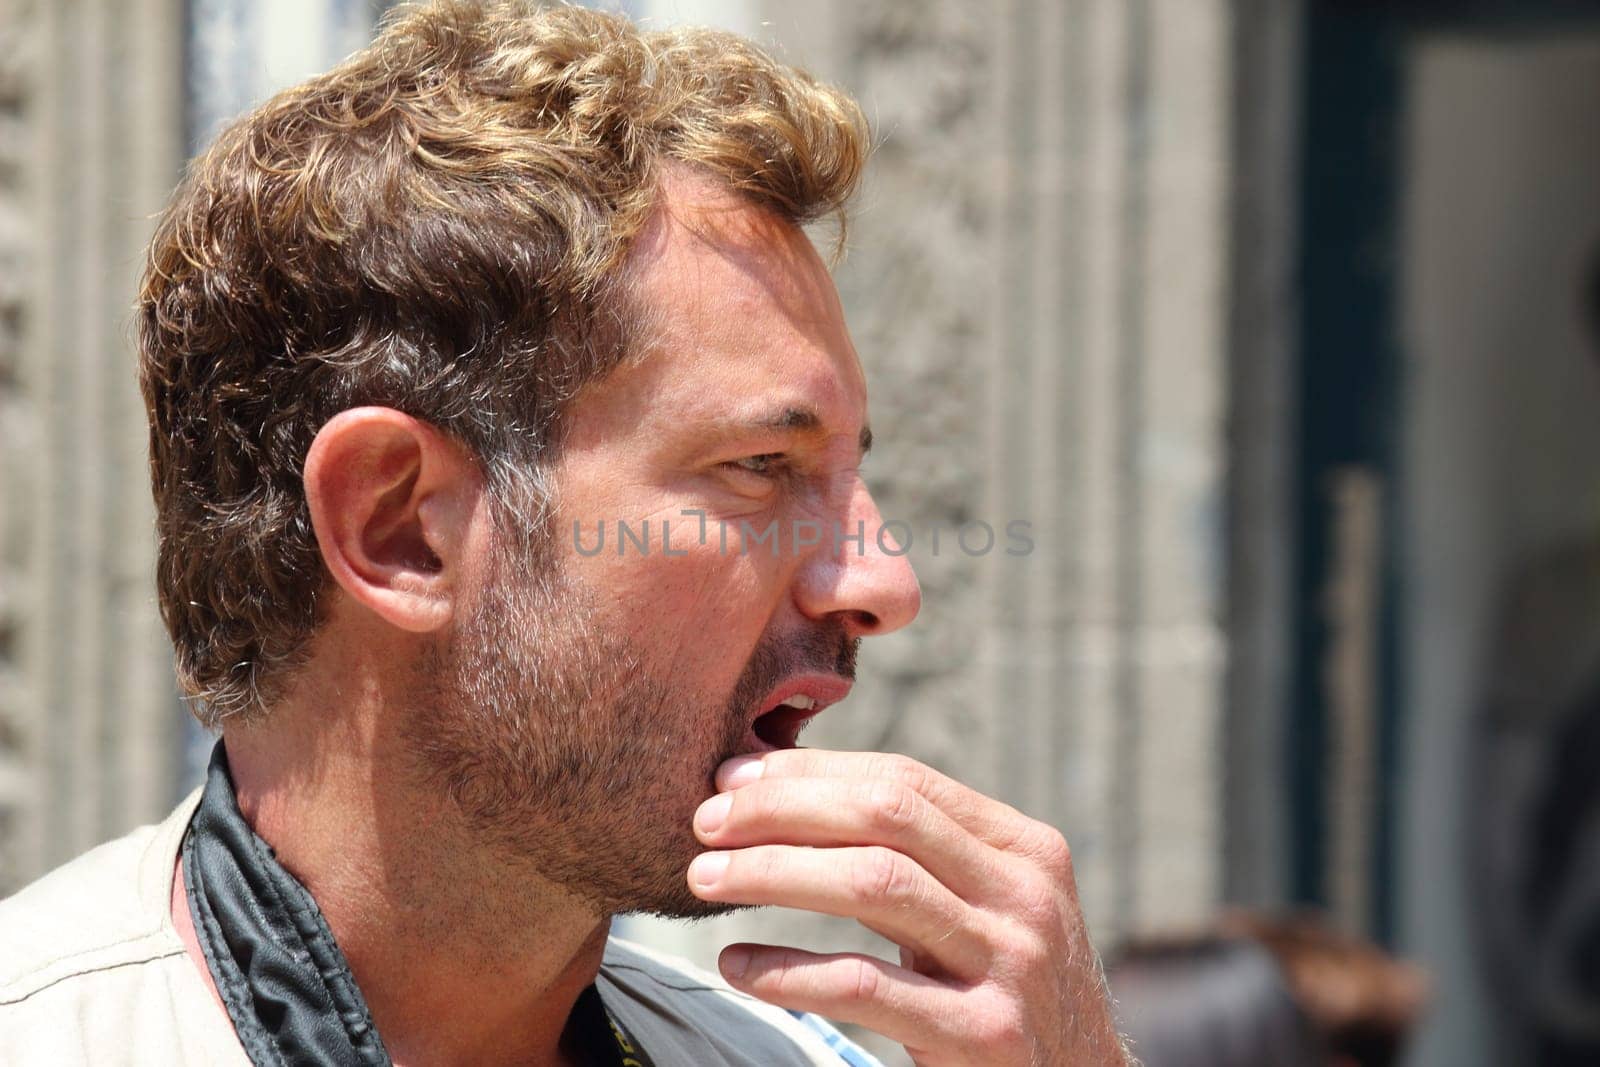 Gabriel Soto at work in Mexico City, "Mexico City, Mexico, September 17 2019. by Marcielito